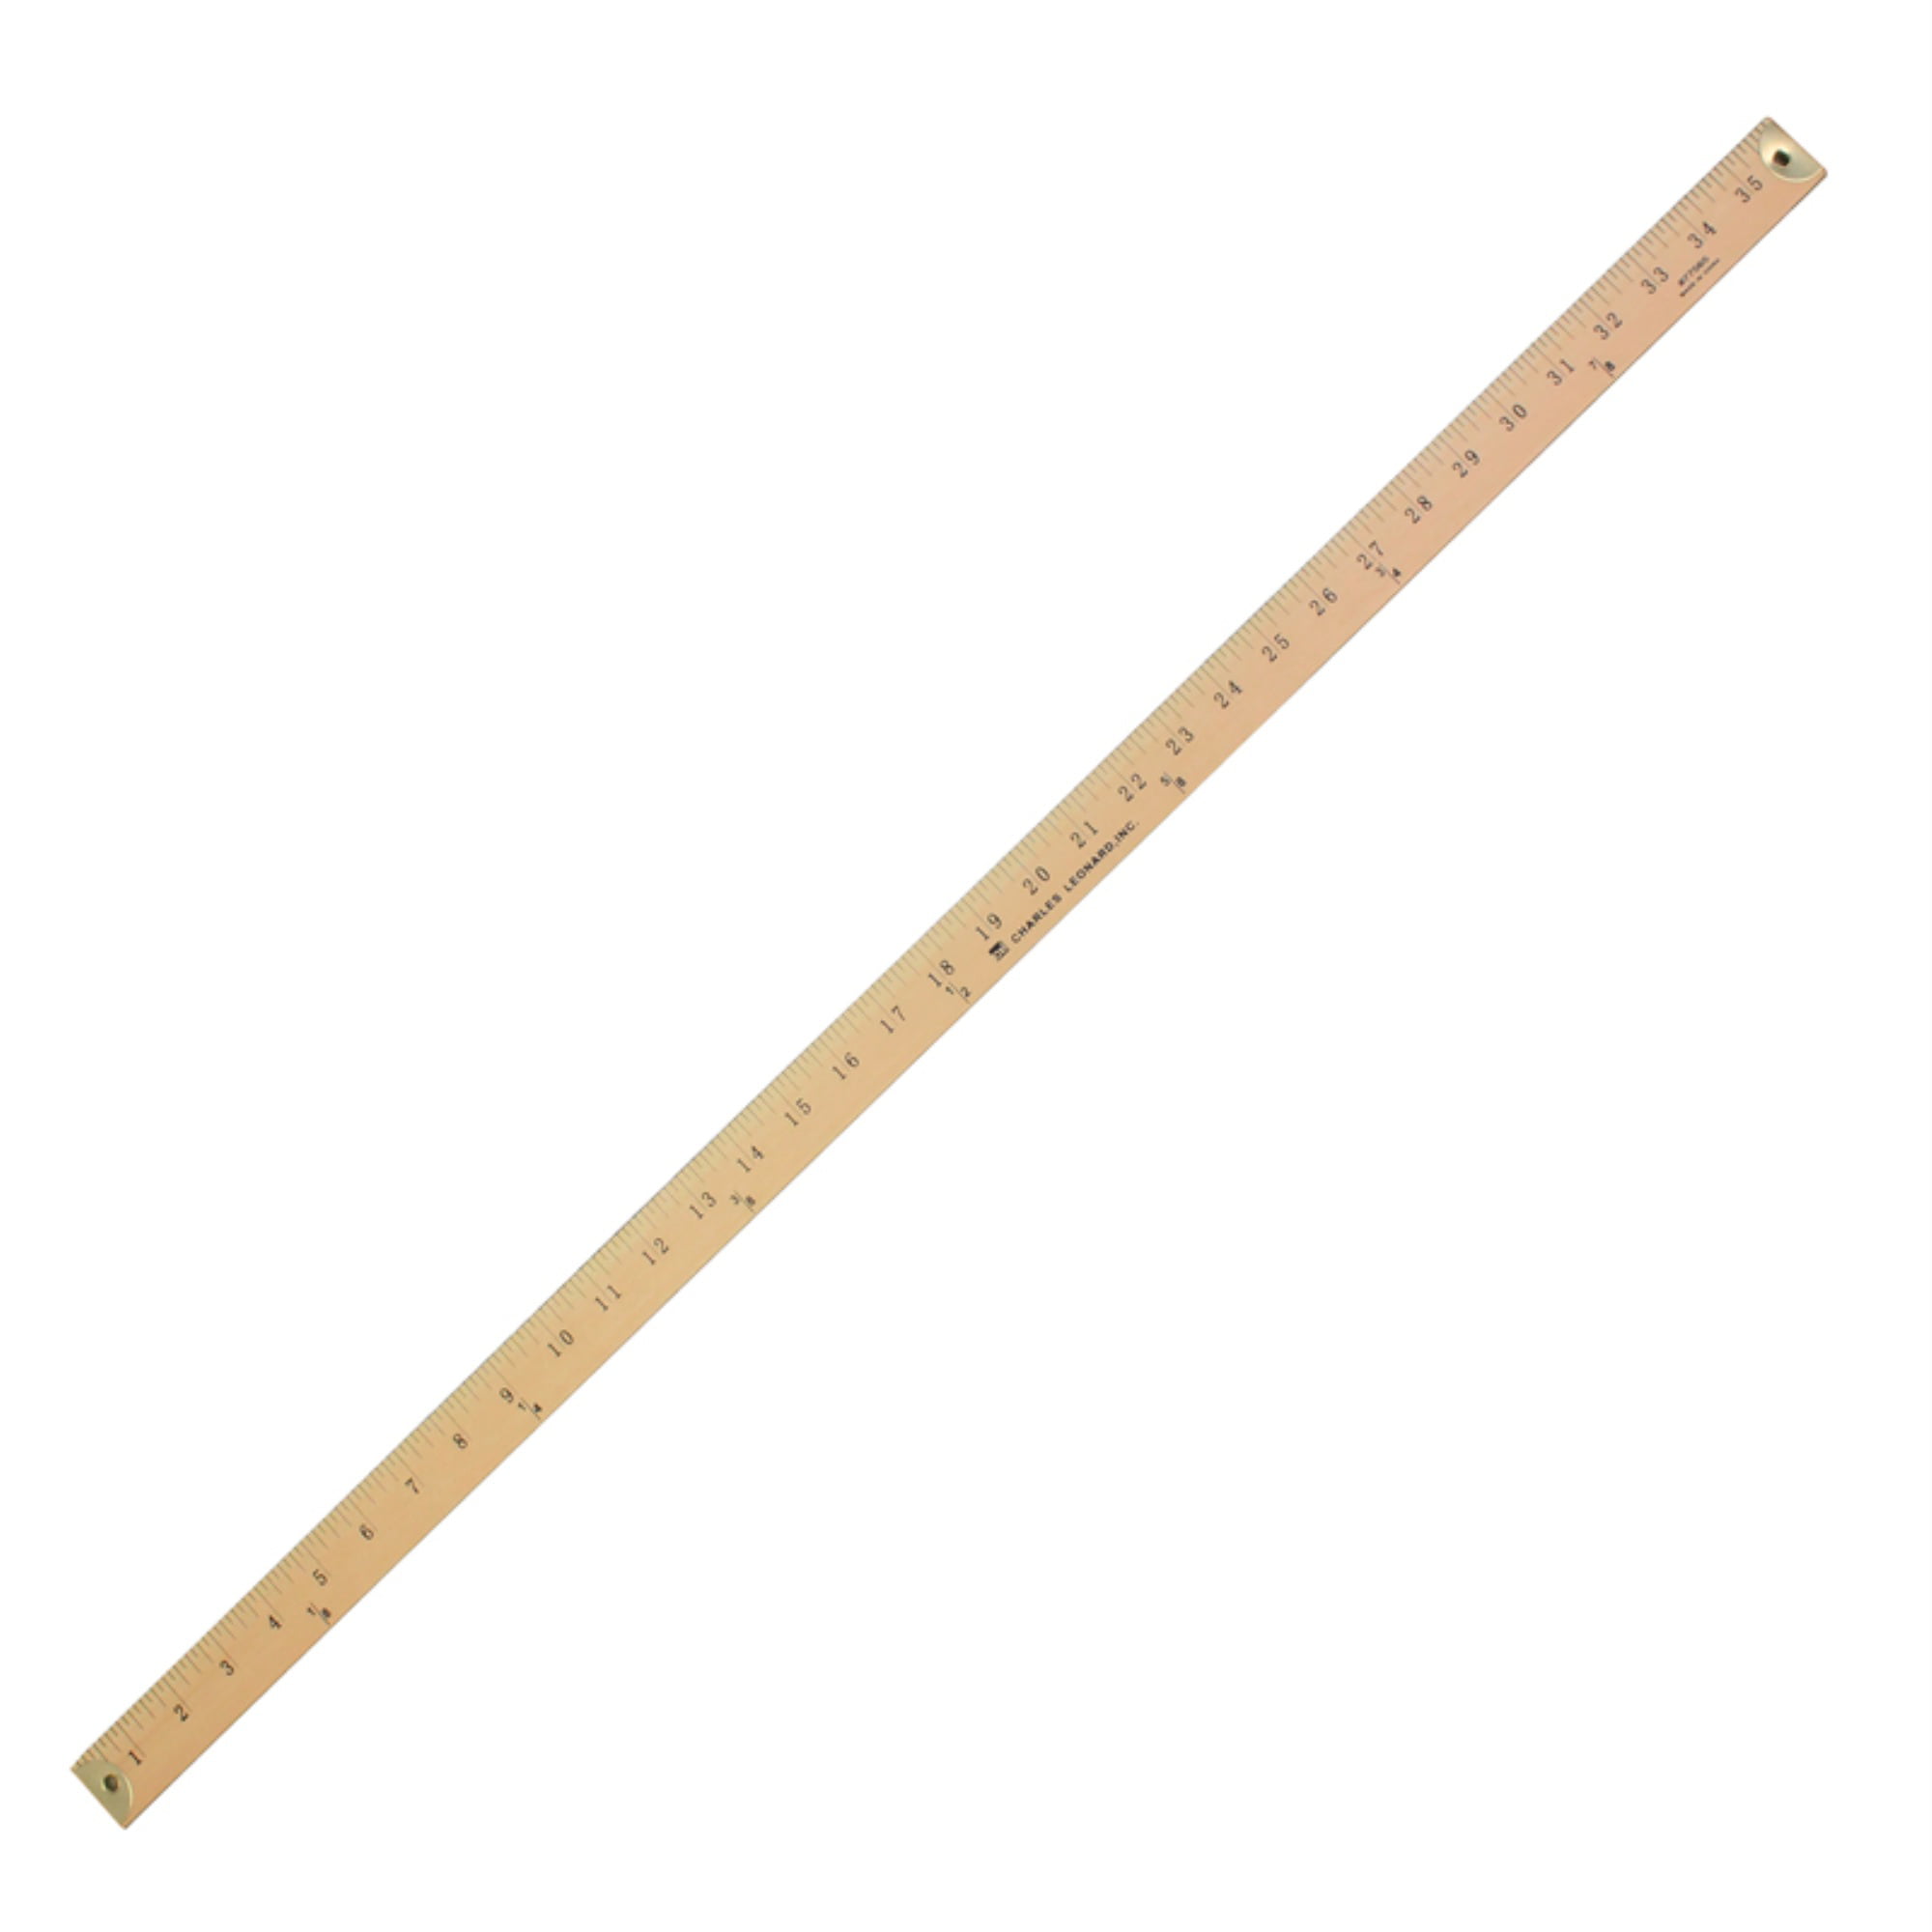 Metal Edged Yardstick Ruler Inches And 18 Yard M